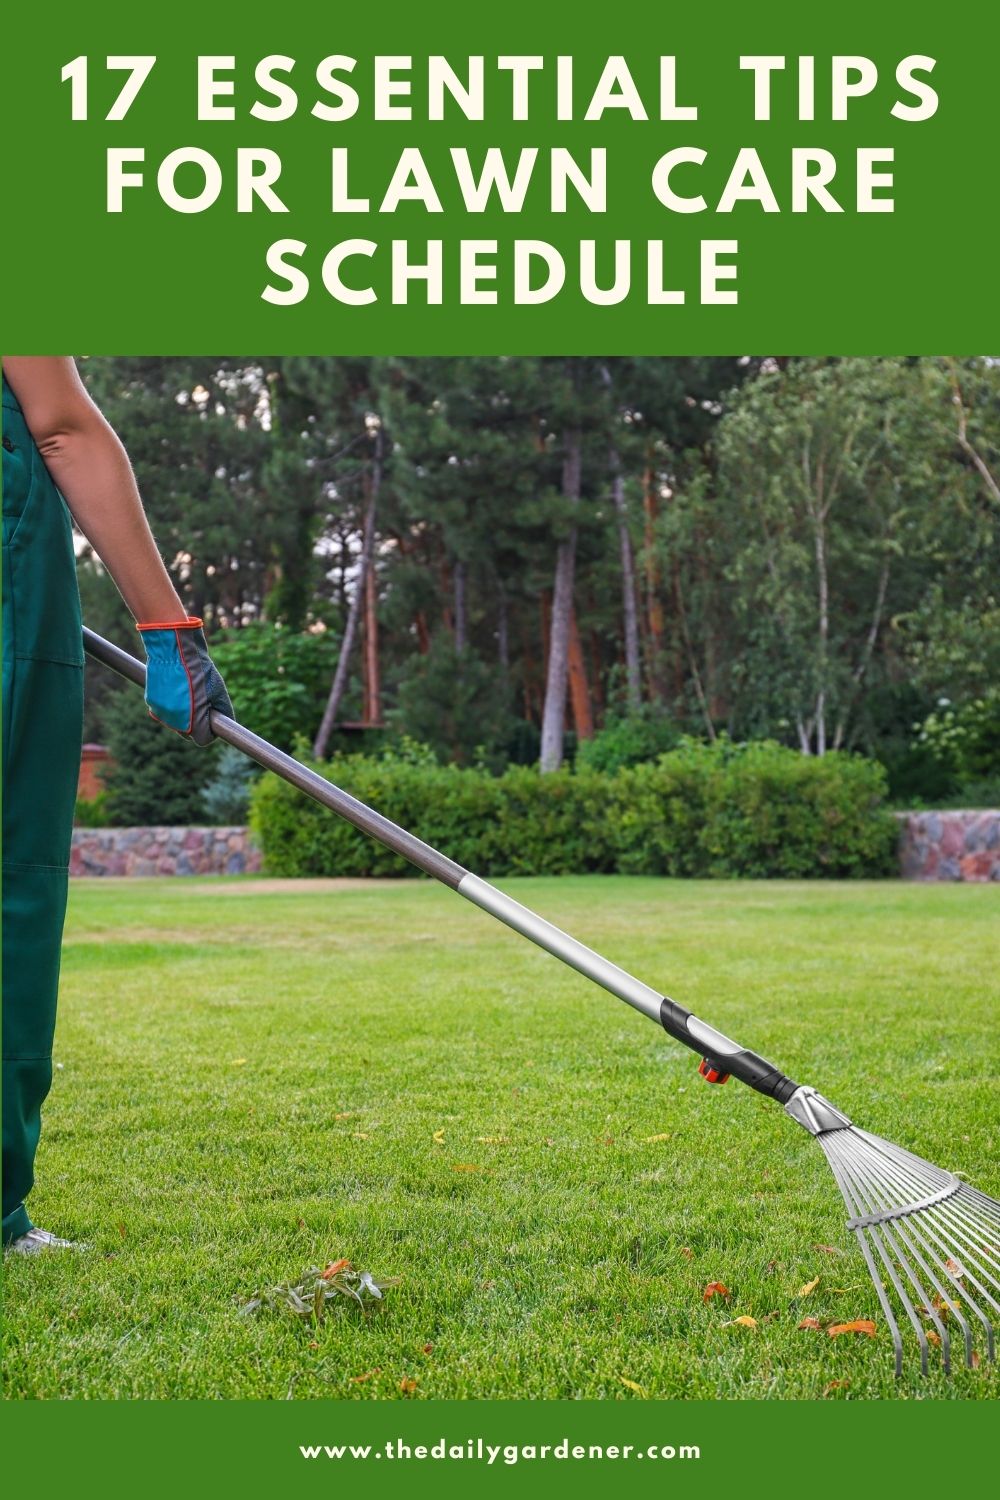 17 Essential Tips for Lawn Care Schedule 2